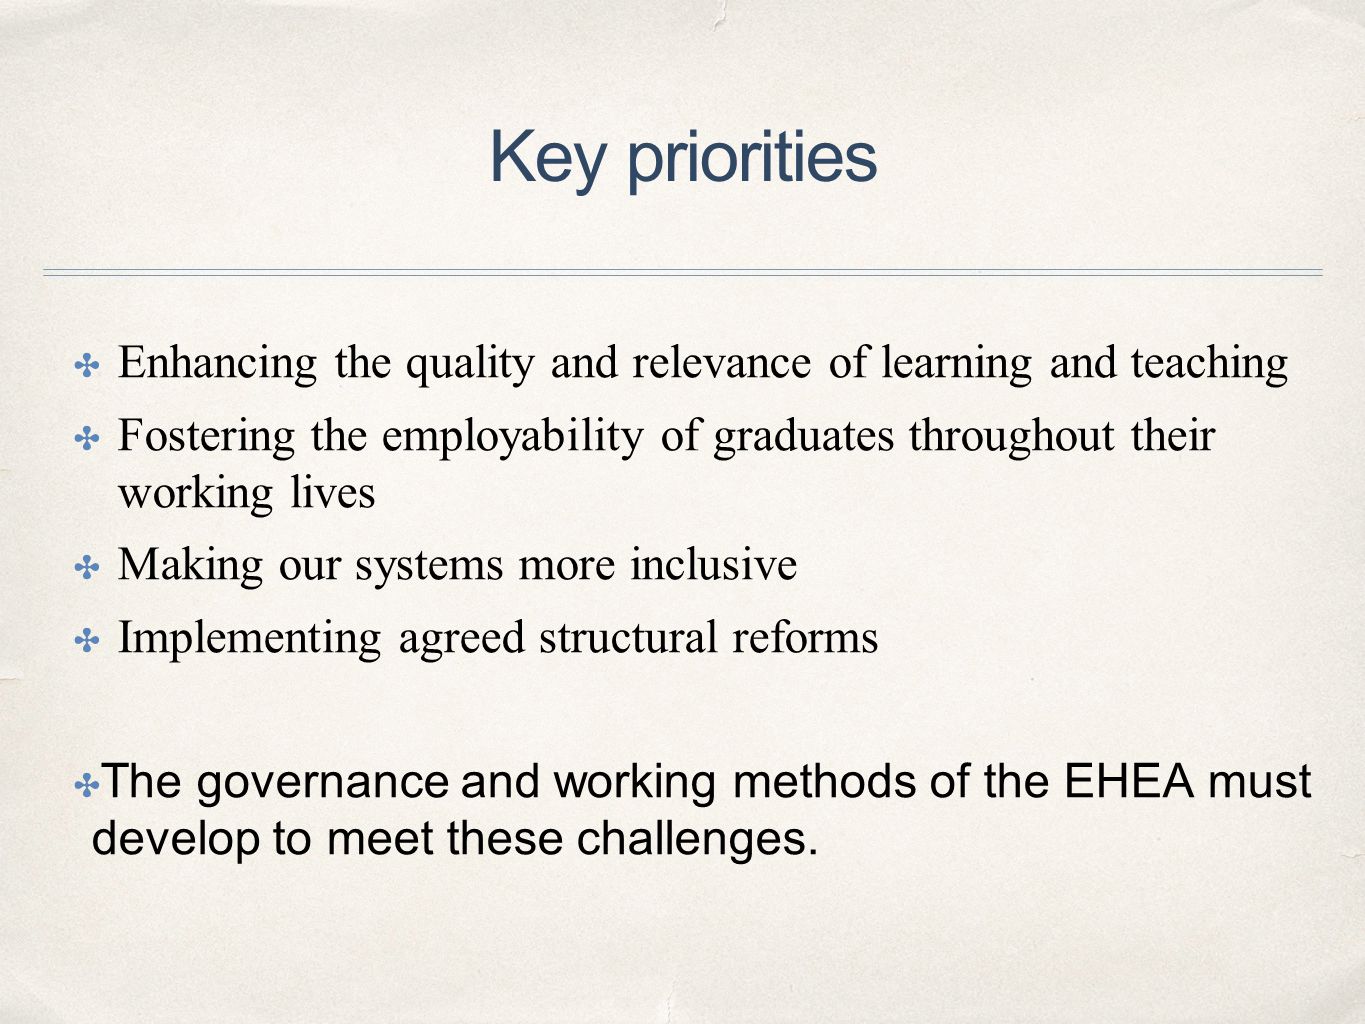 Key priorities ✤ Enhancing the quality and relevance of learning and teaching ✤ Fostering the employability of graduates throughout their working lives ✤ Making our systems more inclusive ✤ Implementing agreed structural reforms ✤ The governance and working methods of the EHEA must develop to meet these challenges.